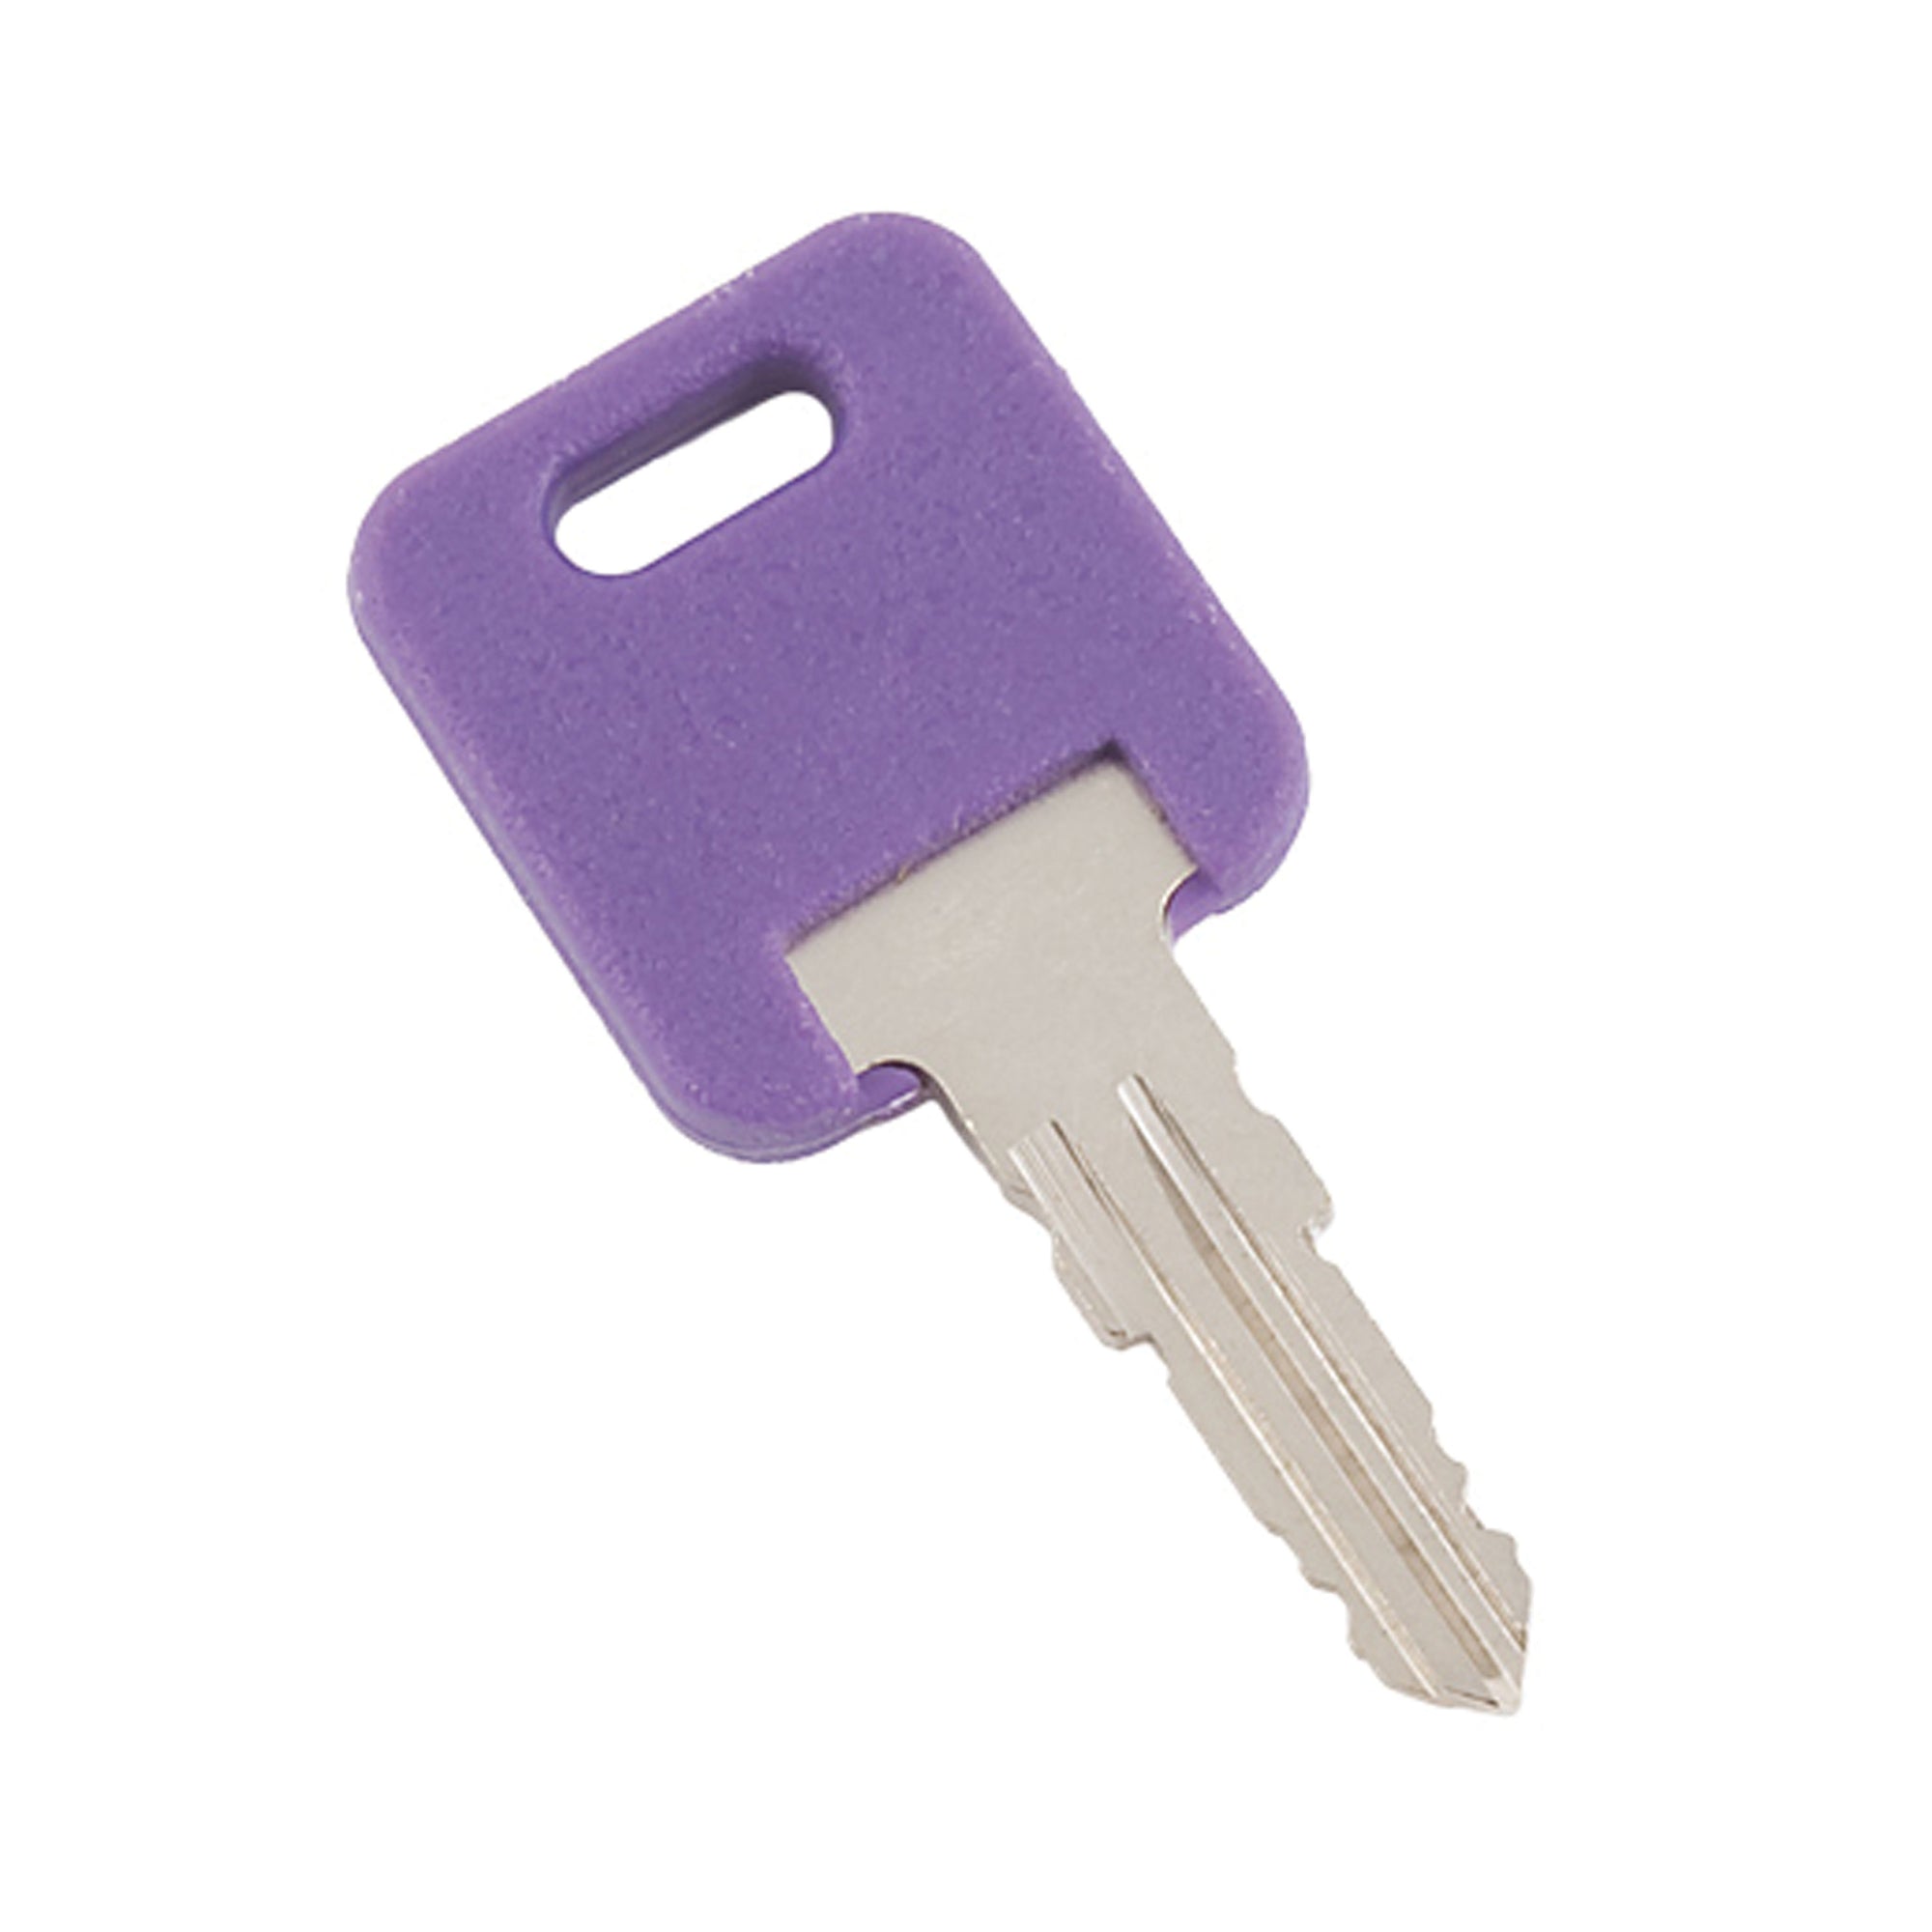 Creative Products Group G-308 Global Link G-Series Replacement Key - #308, Each